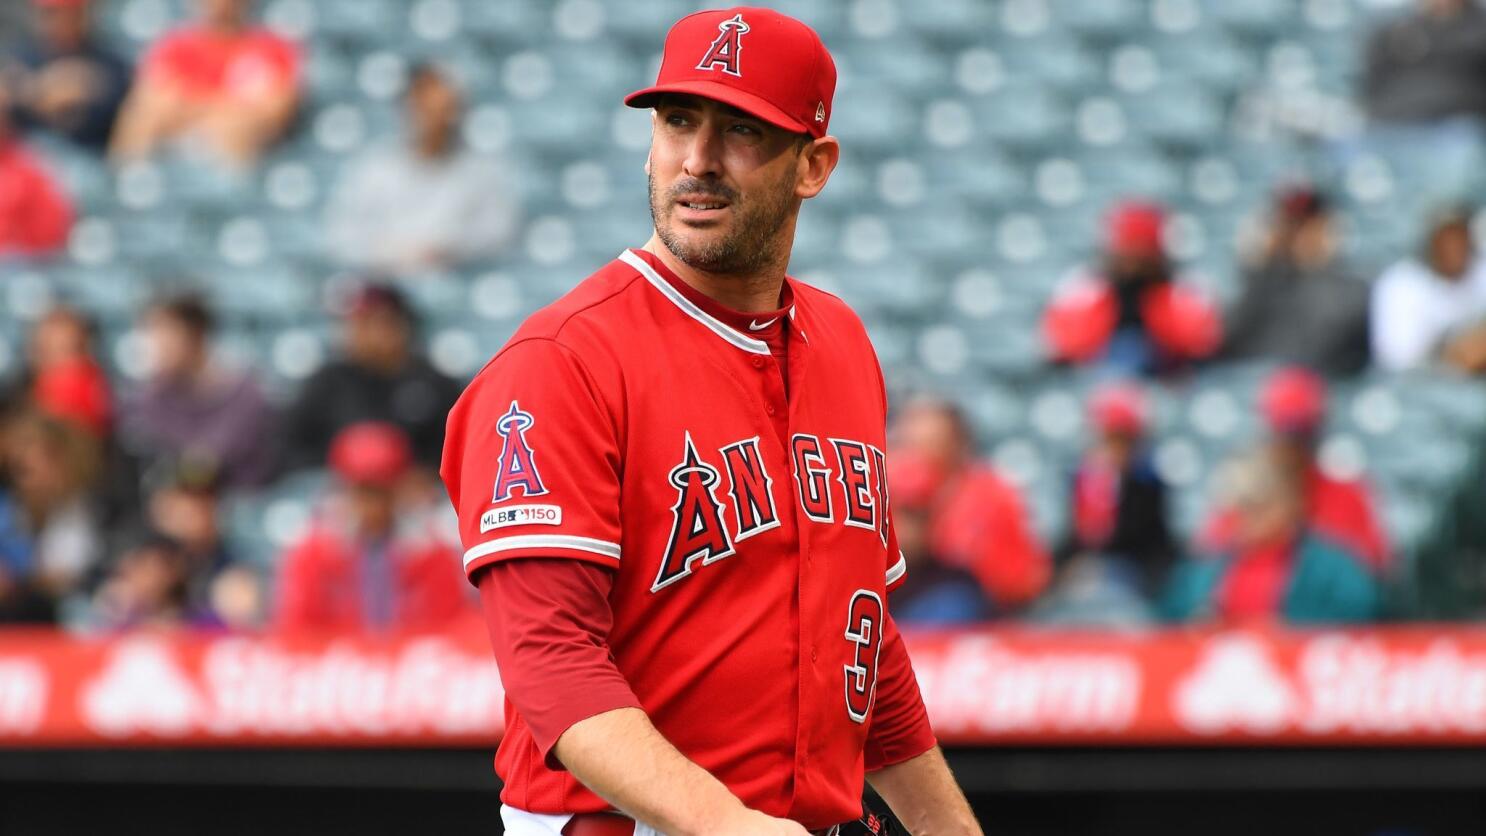 Angels pitcher Tyler Skaggs' death being investigated by DEA, report says